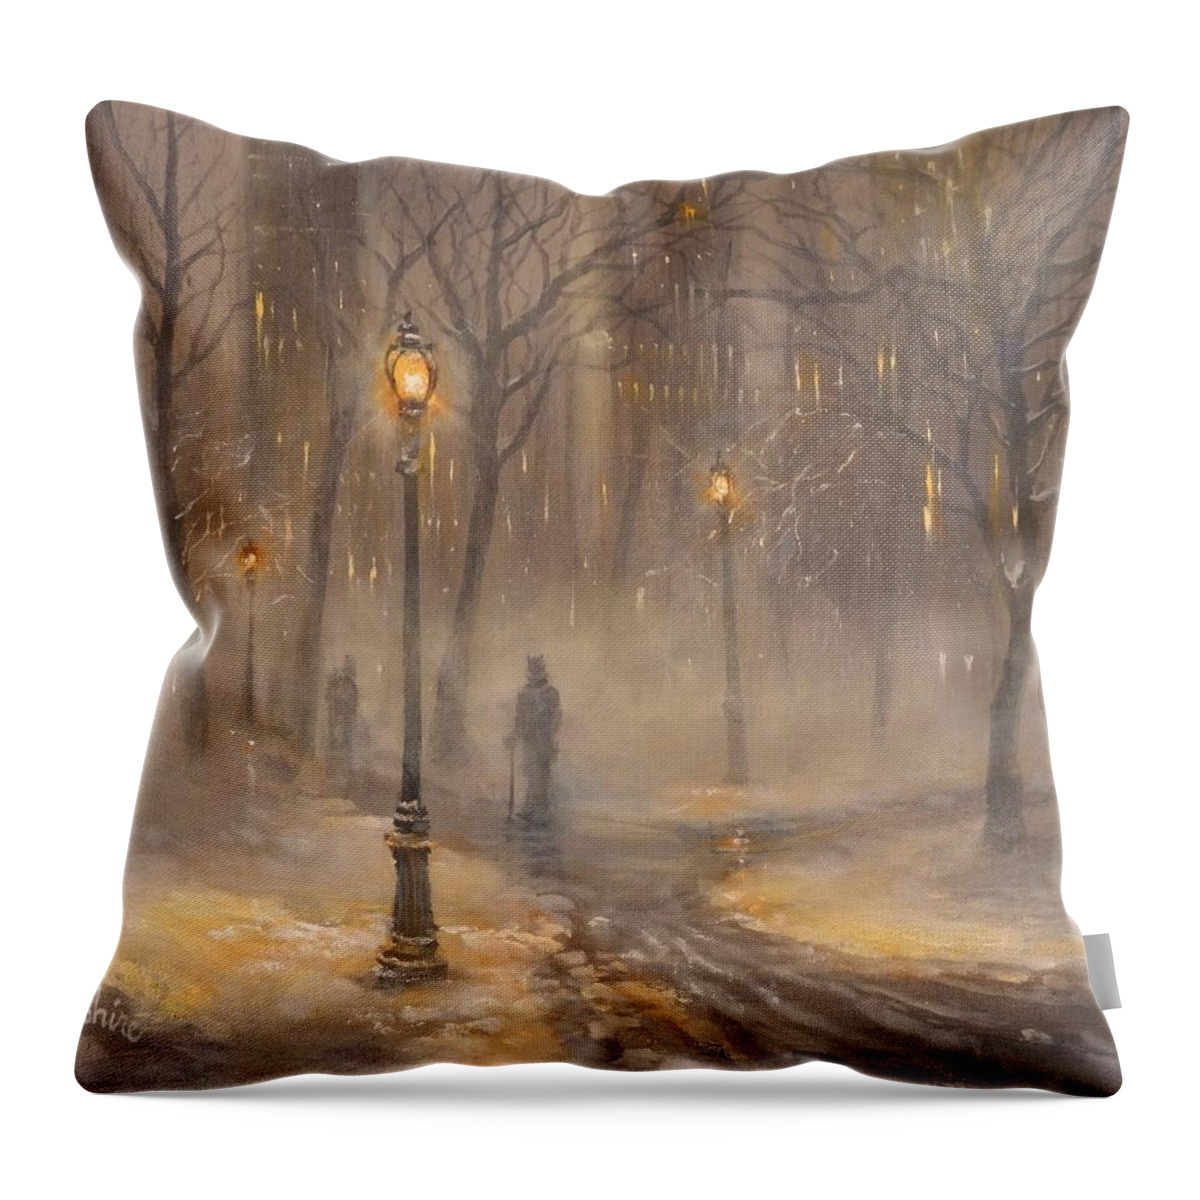 New York Throw Pillow featuring the painting Central Park After Dark by Tom Shropshire